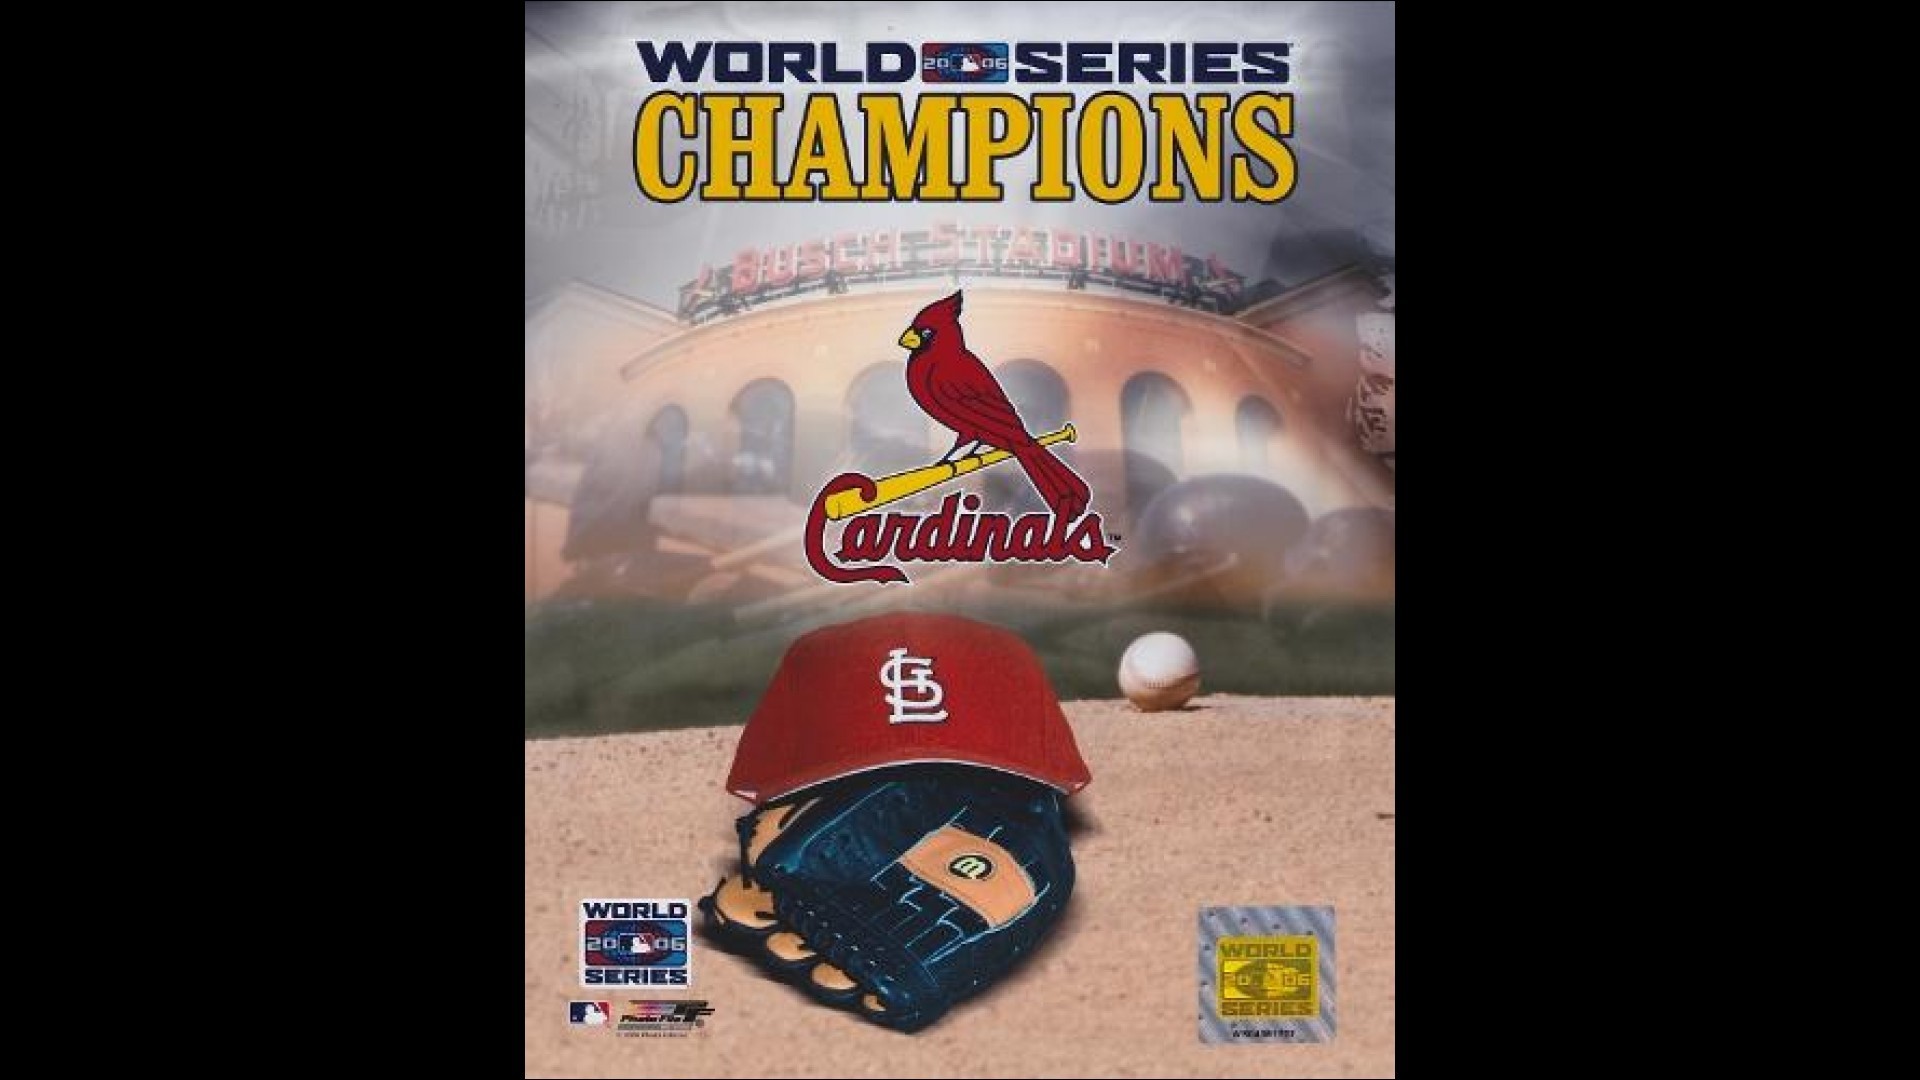 1920x1080 St Louis Cardinals Wallpapers 1 2 Paid Texas Rangers Wallpapers 1 2